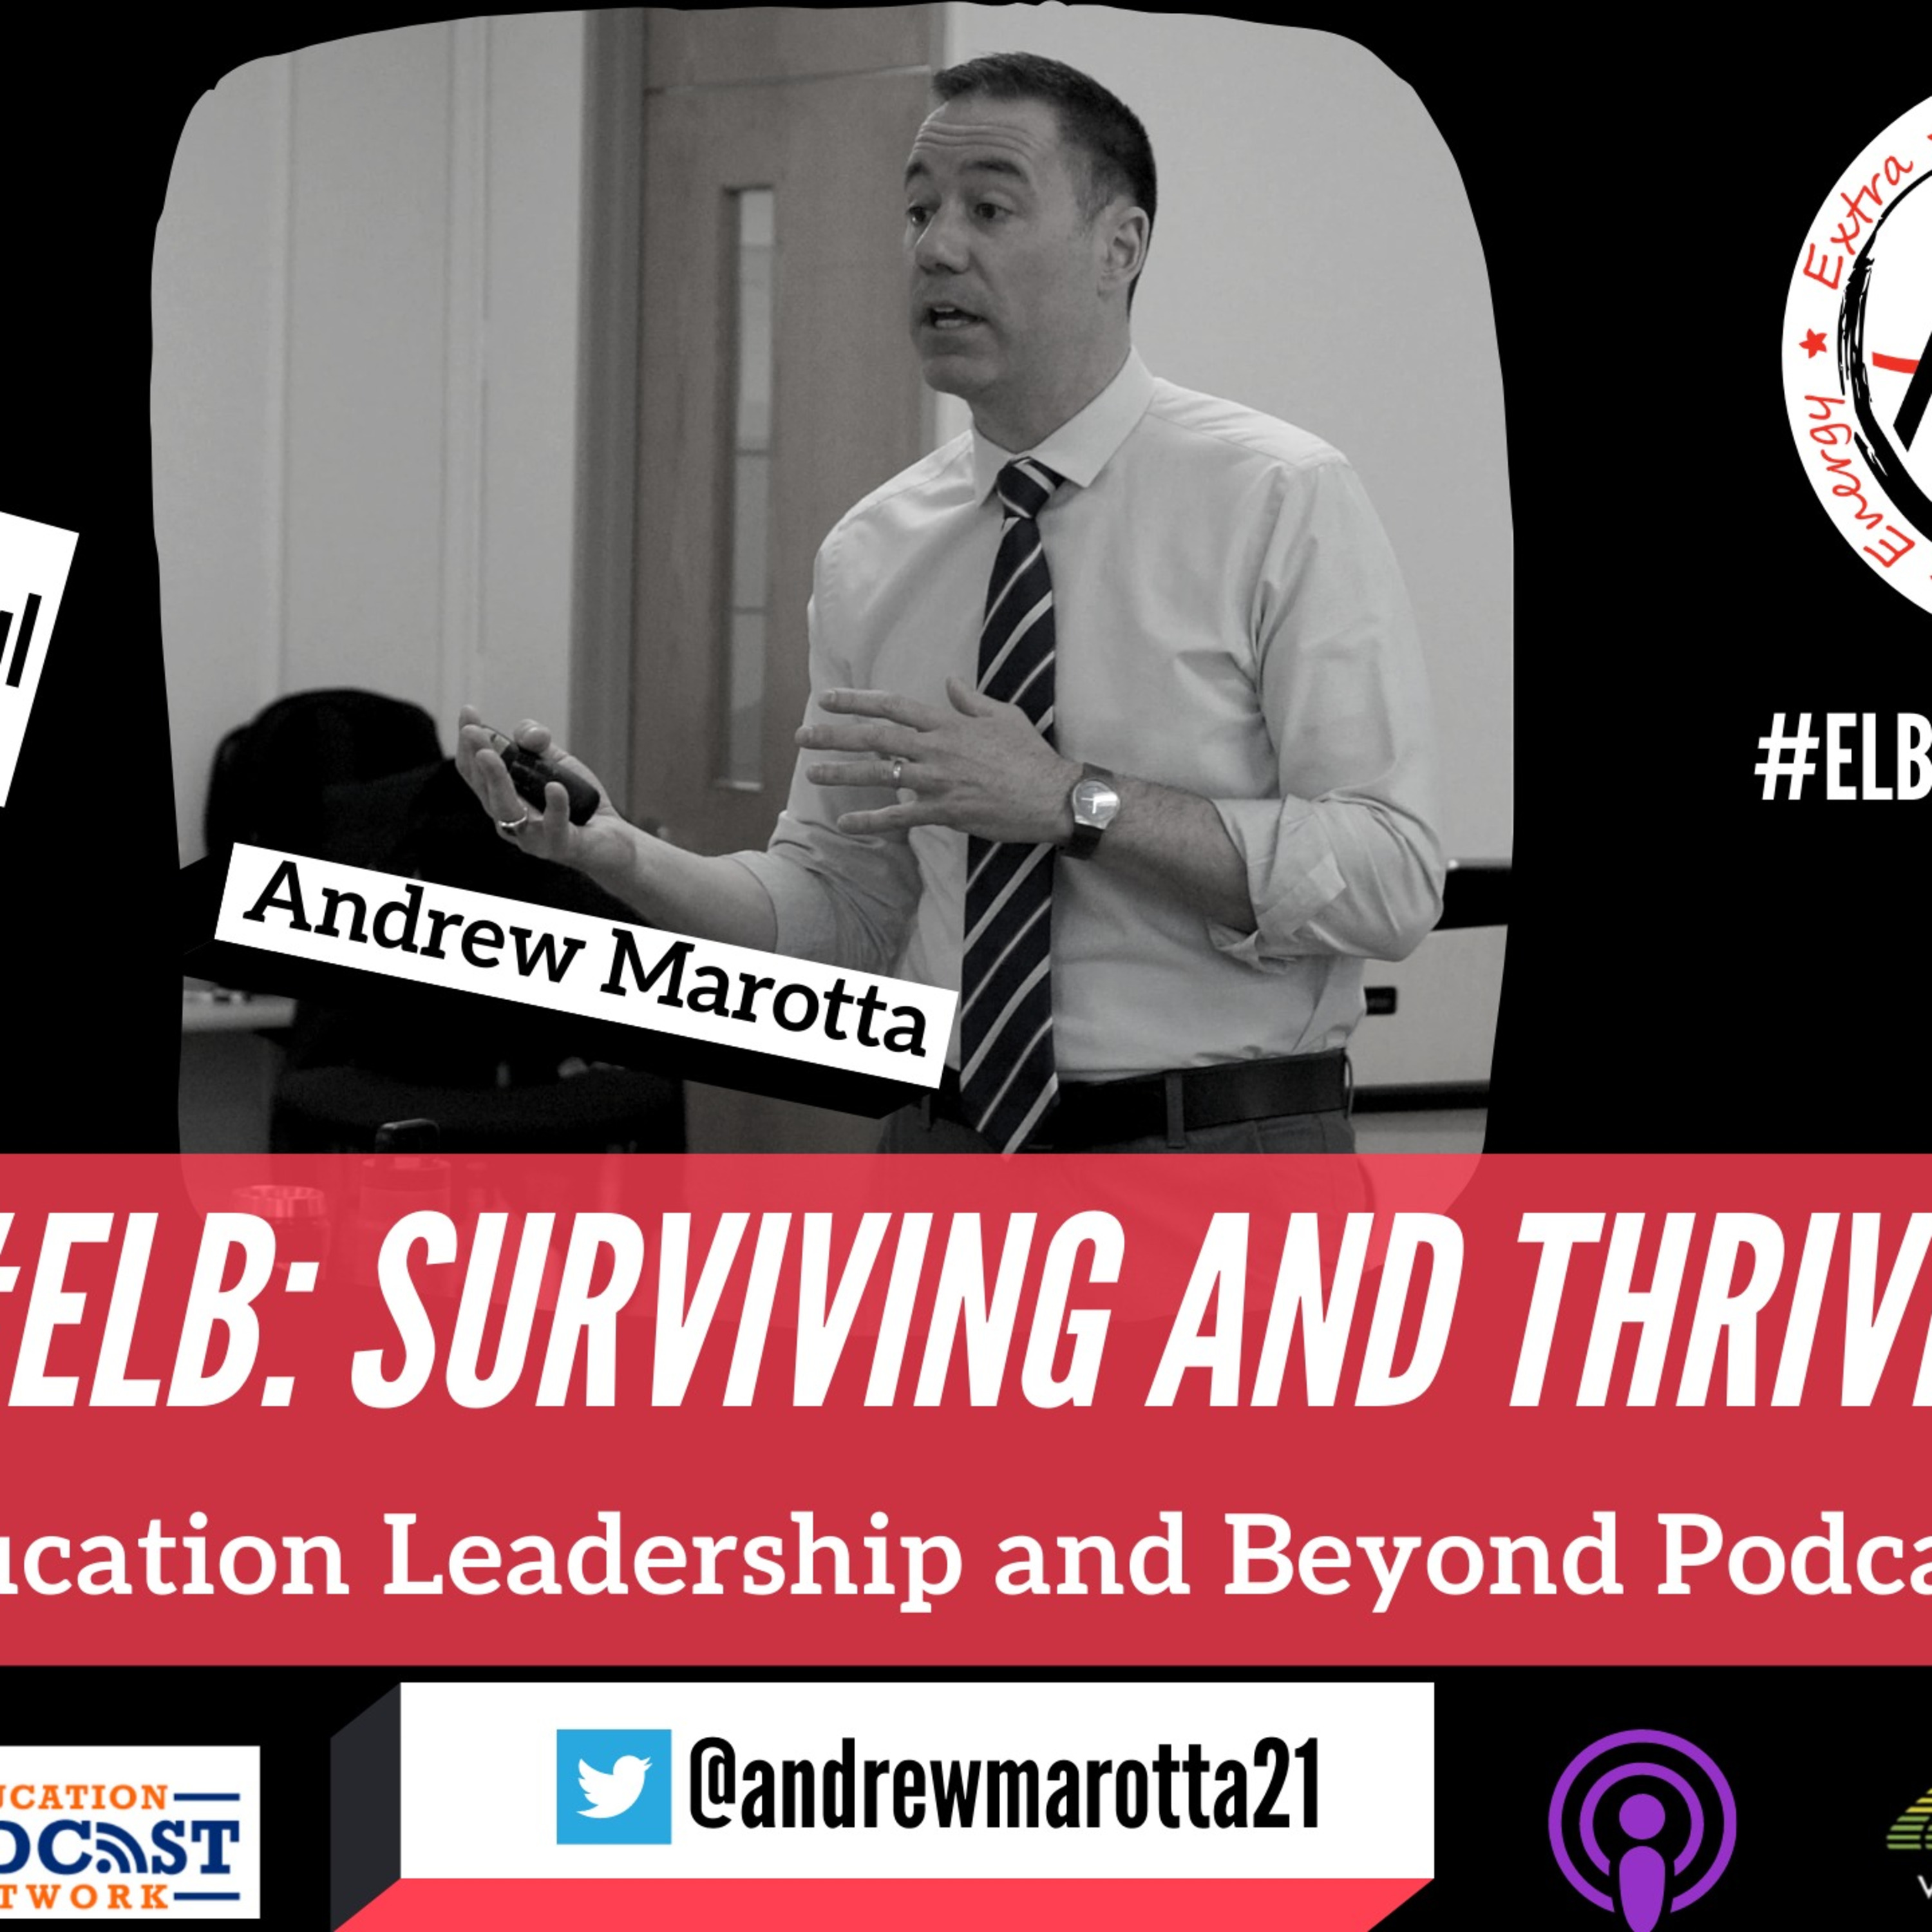 Episode 156: #ELB 156 w Suzanne Carbonaro, Director of Academic Partnerships @ AEFIS Academy & my sister! Image